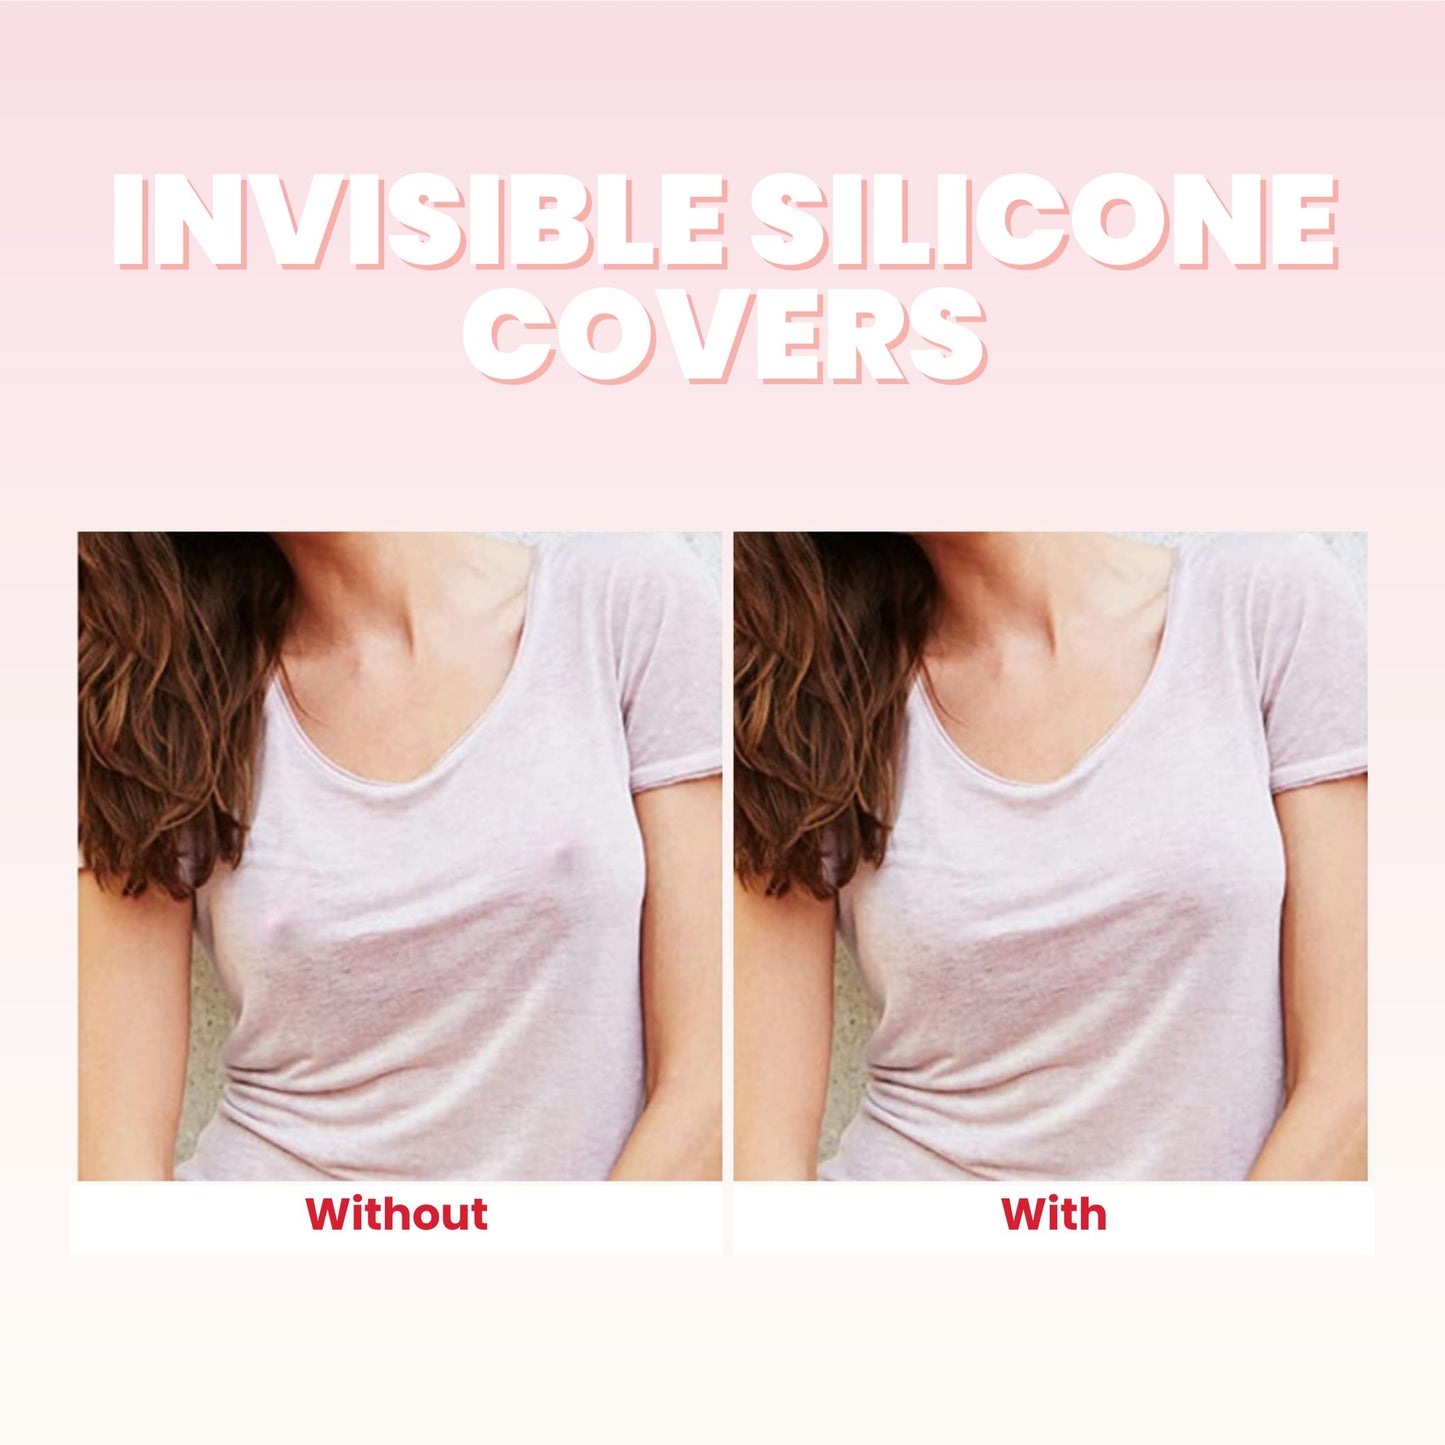 Invisible Silicone Covers